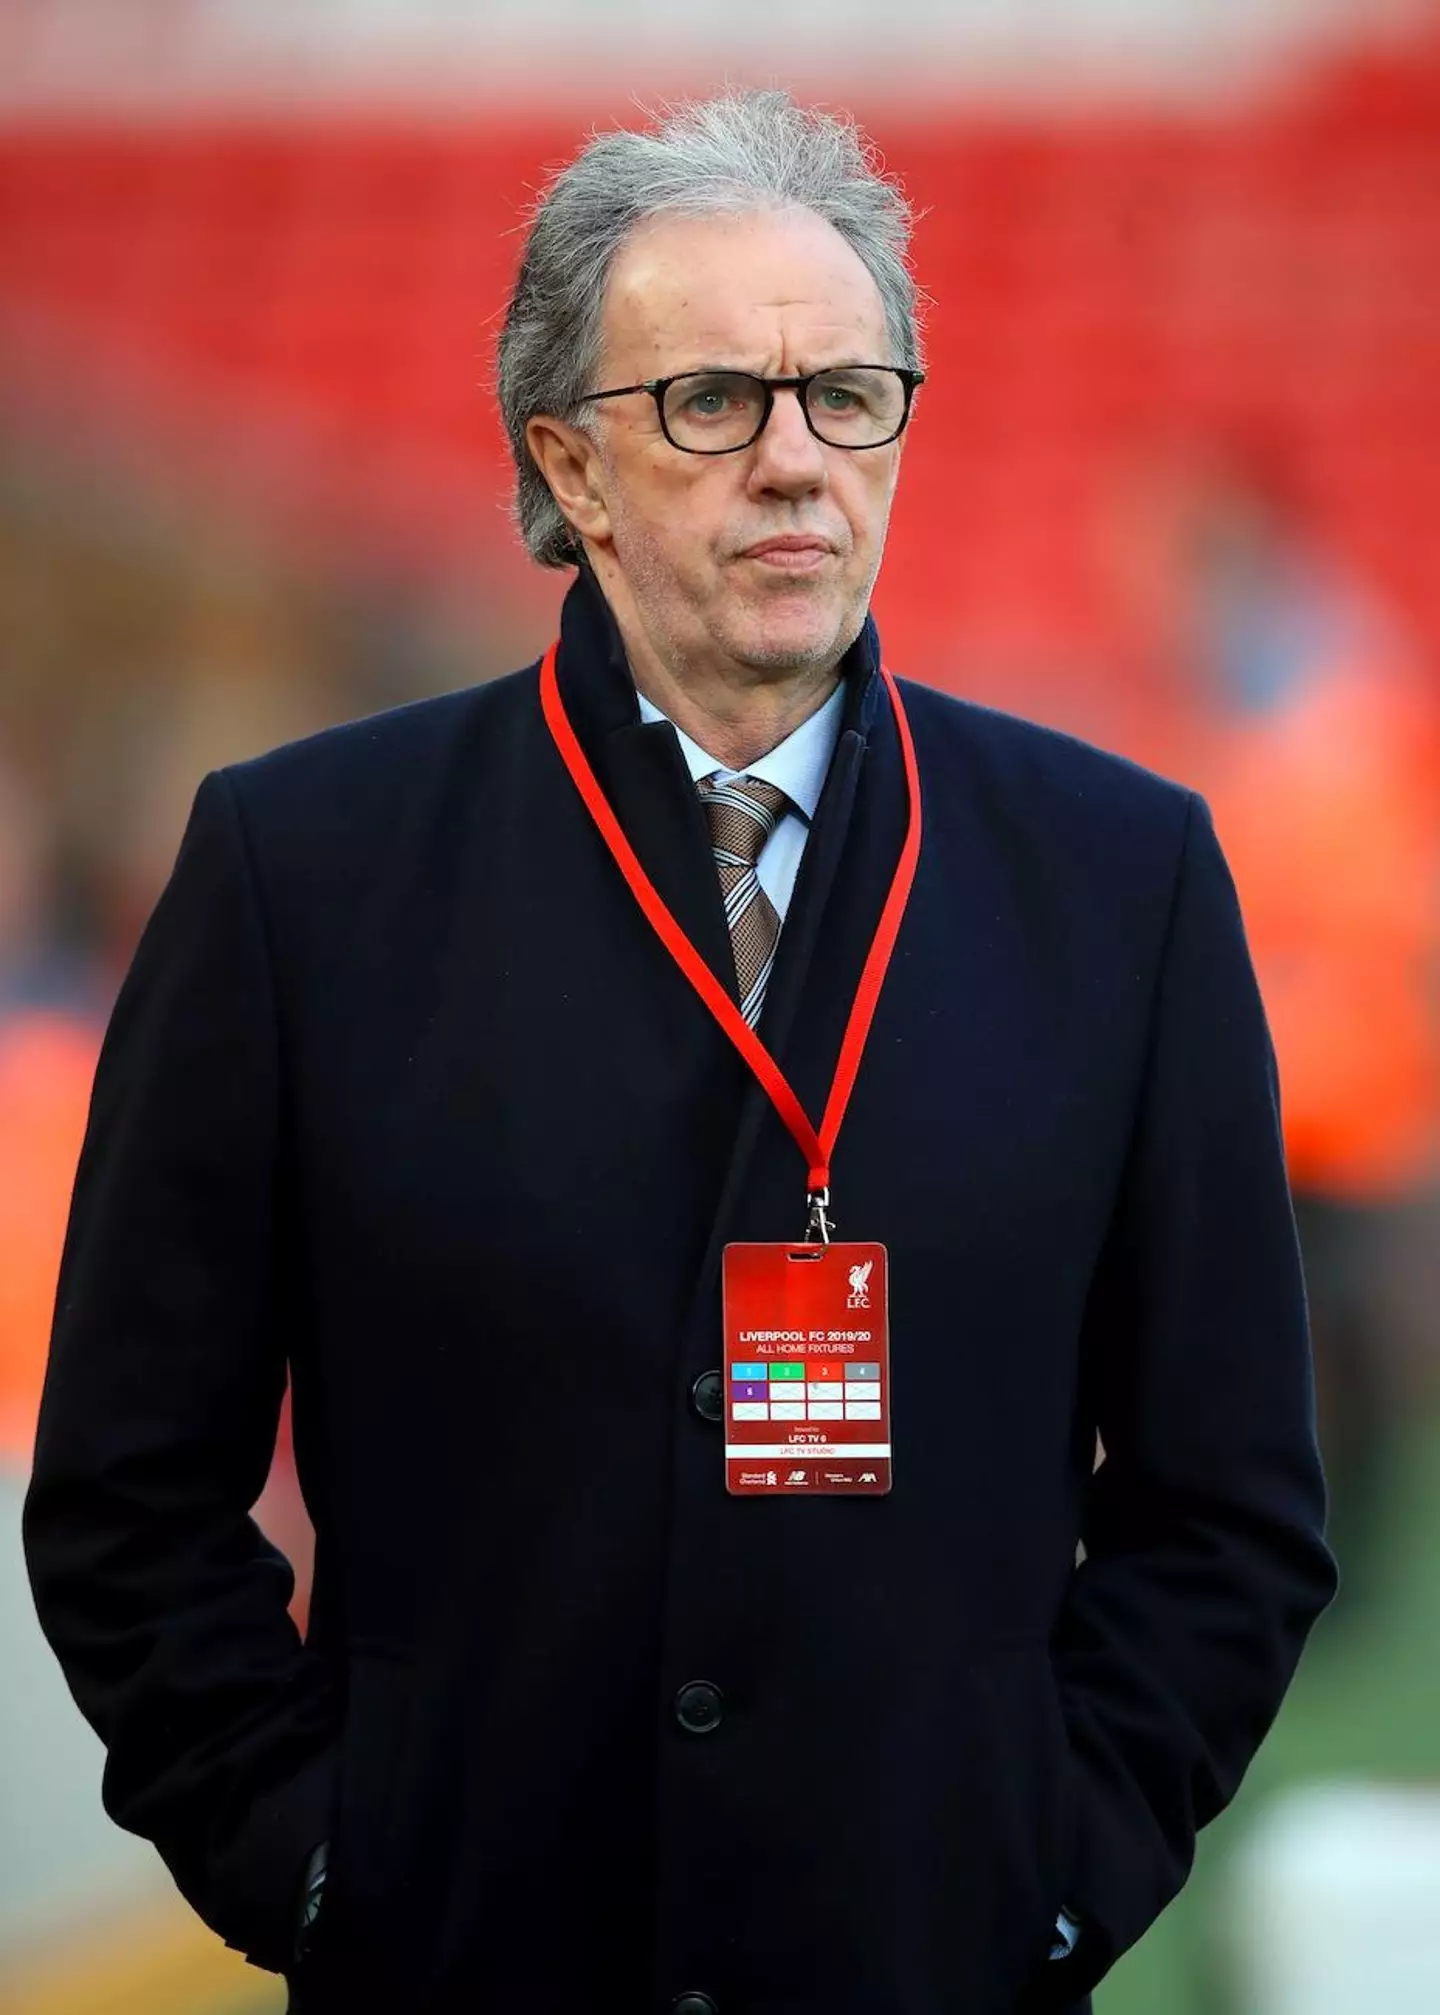 Mark Lawrenson during the FA Cup third round match at Anfield, Liverpool in 2020.